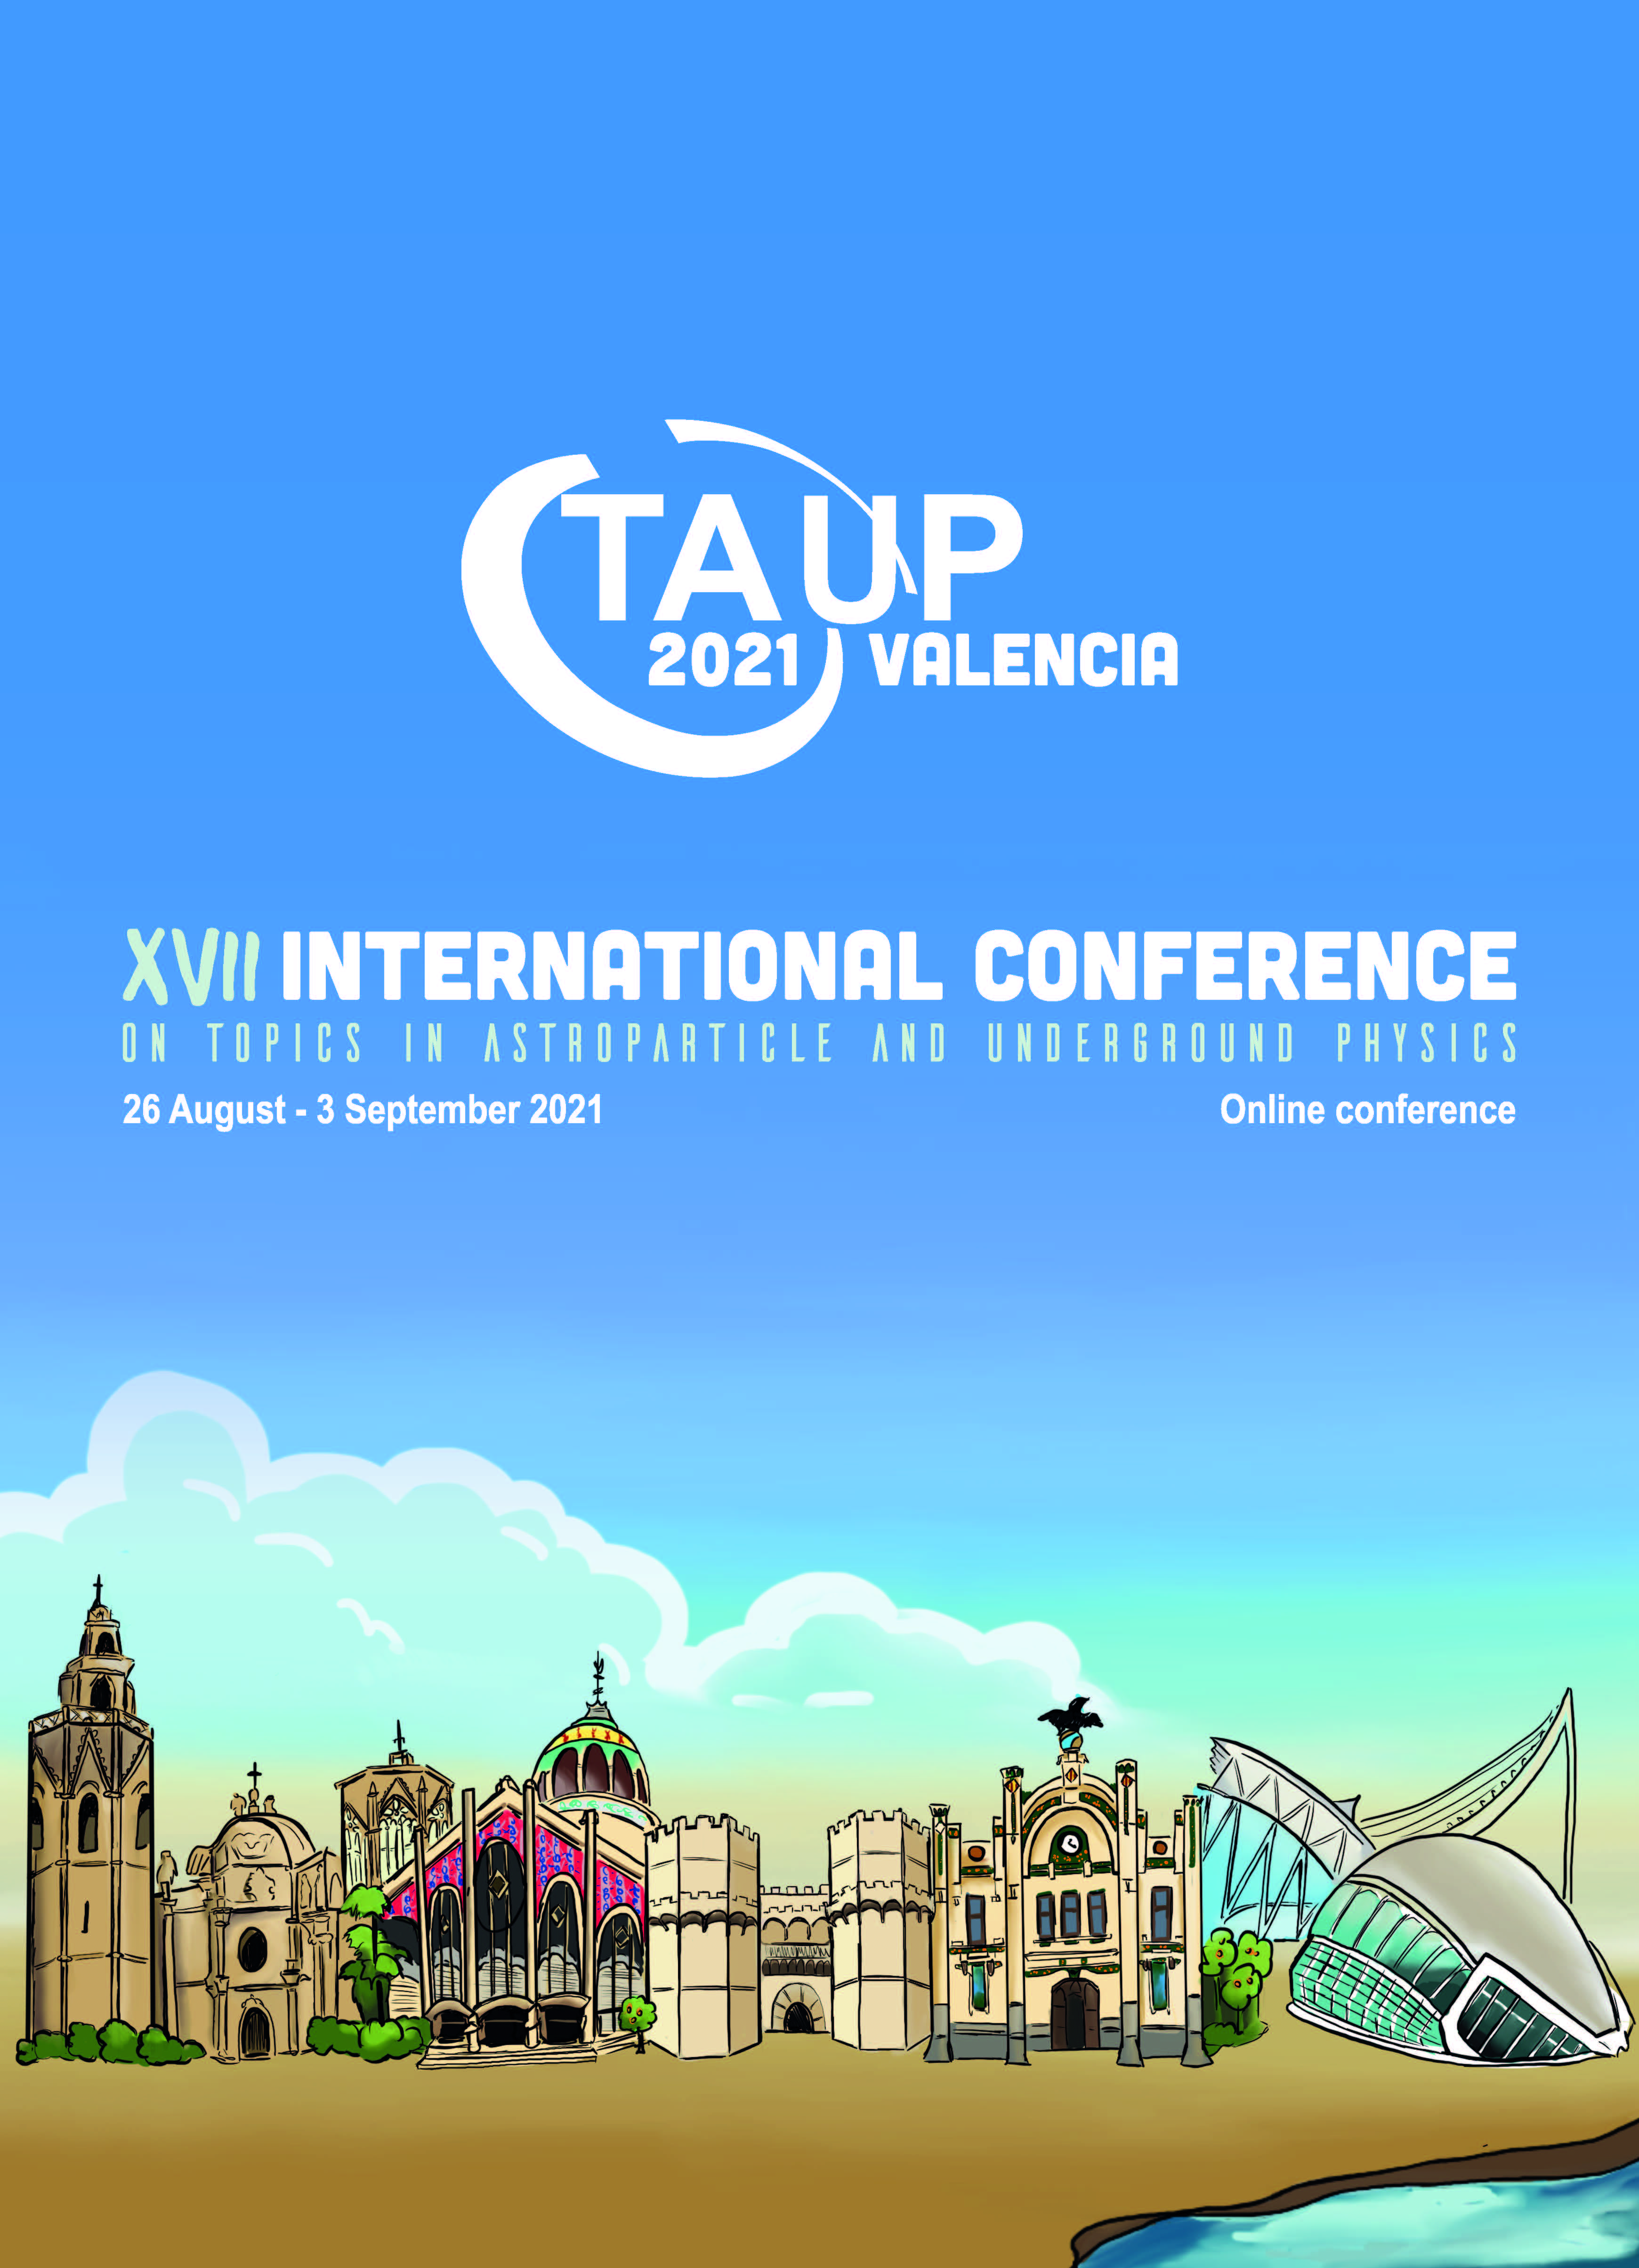 TAUP 2021 Valencia Poster (IFIC 2021)